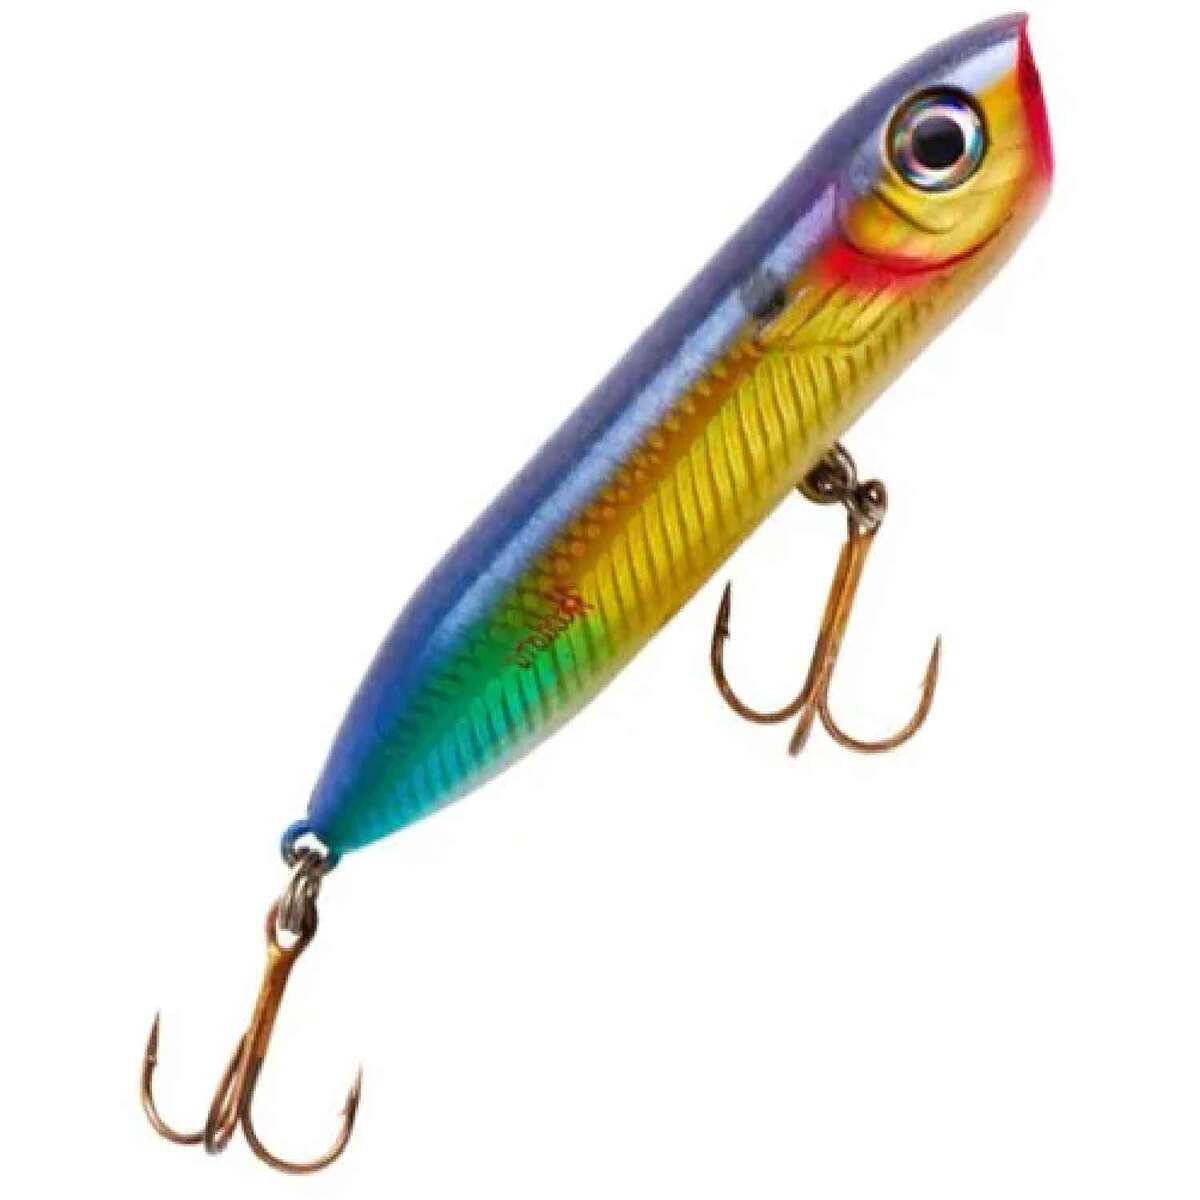 Heddon Super Spook Jr. Fishing Lure - Wounded Shad